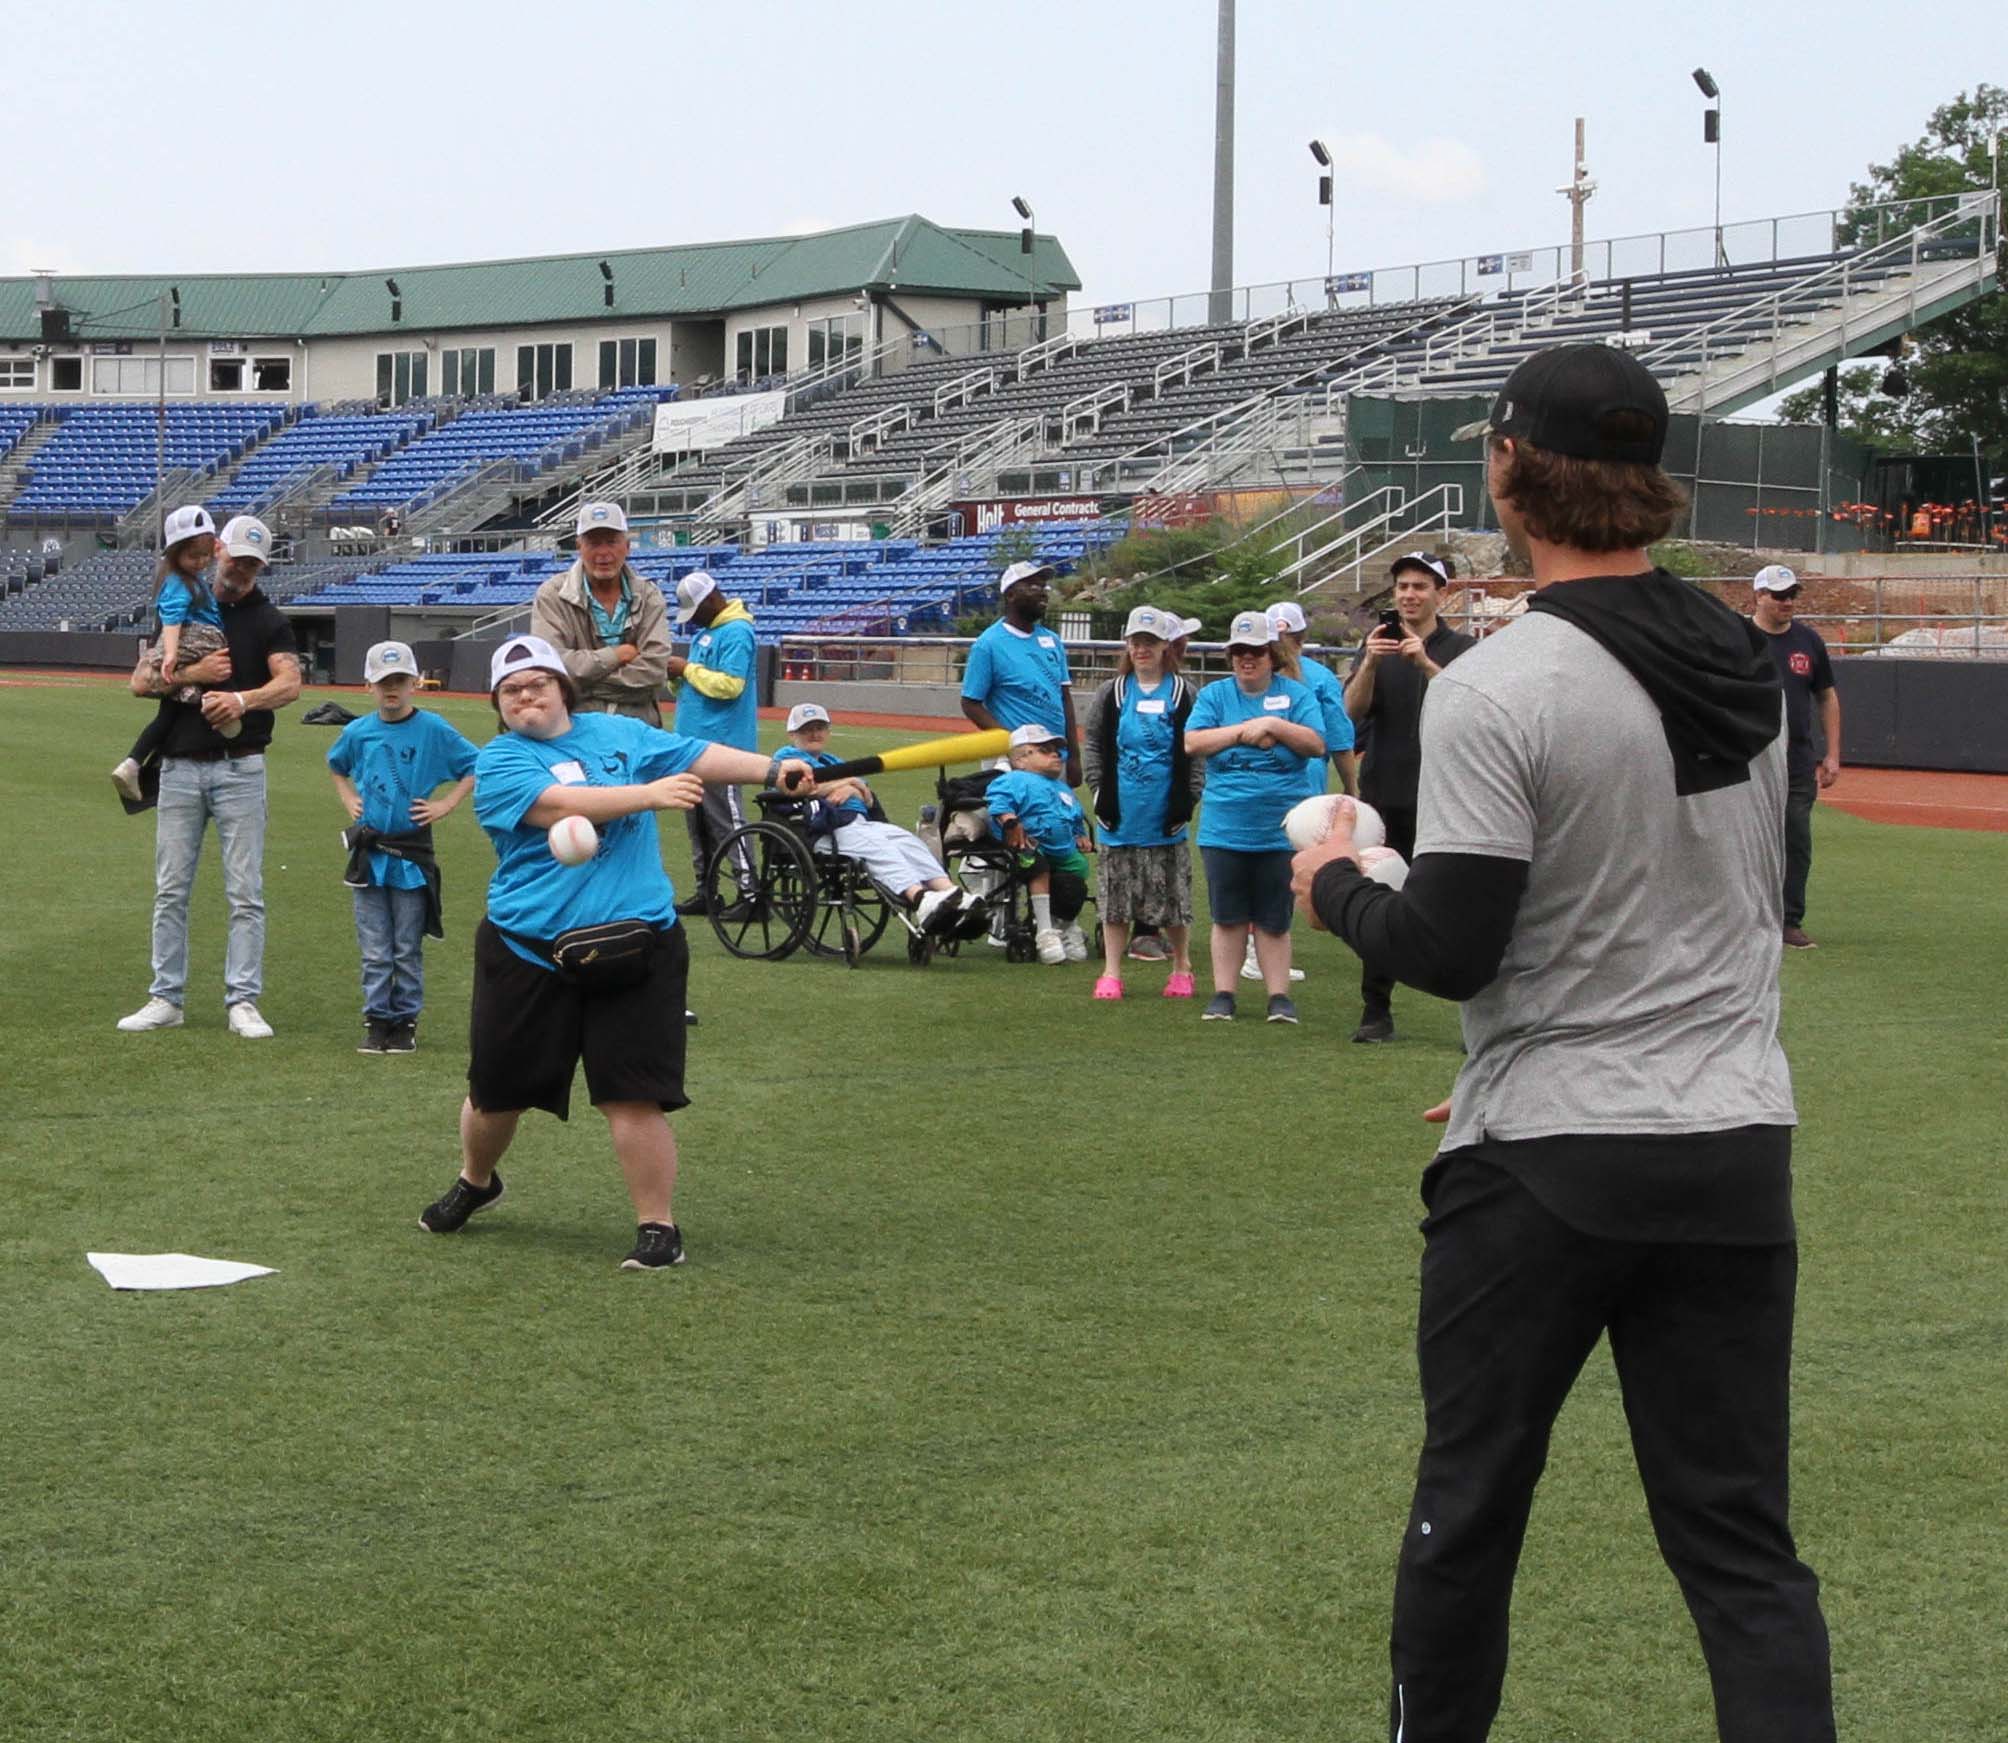 A participant, with a white baseball hat turned backwards, hits a baseball thrown by a Hudson Valley Renegades Player (their back is to us). Behind the hitter a group of participants awaits their turn to hit a baseball. Disability, Dream and Do (also known as D3 Day) at Heritage Financial Field, June 17, 2023